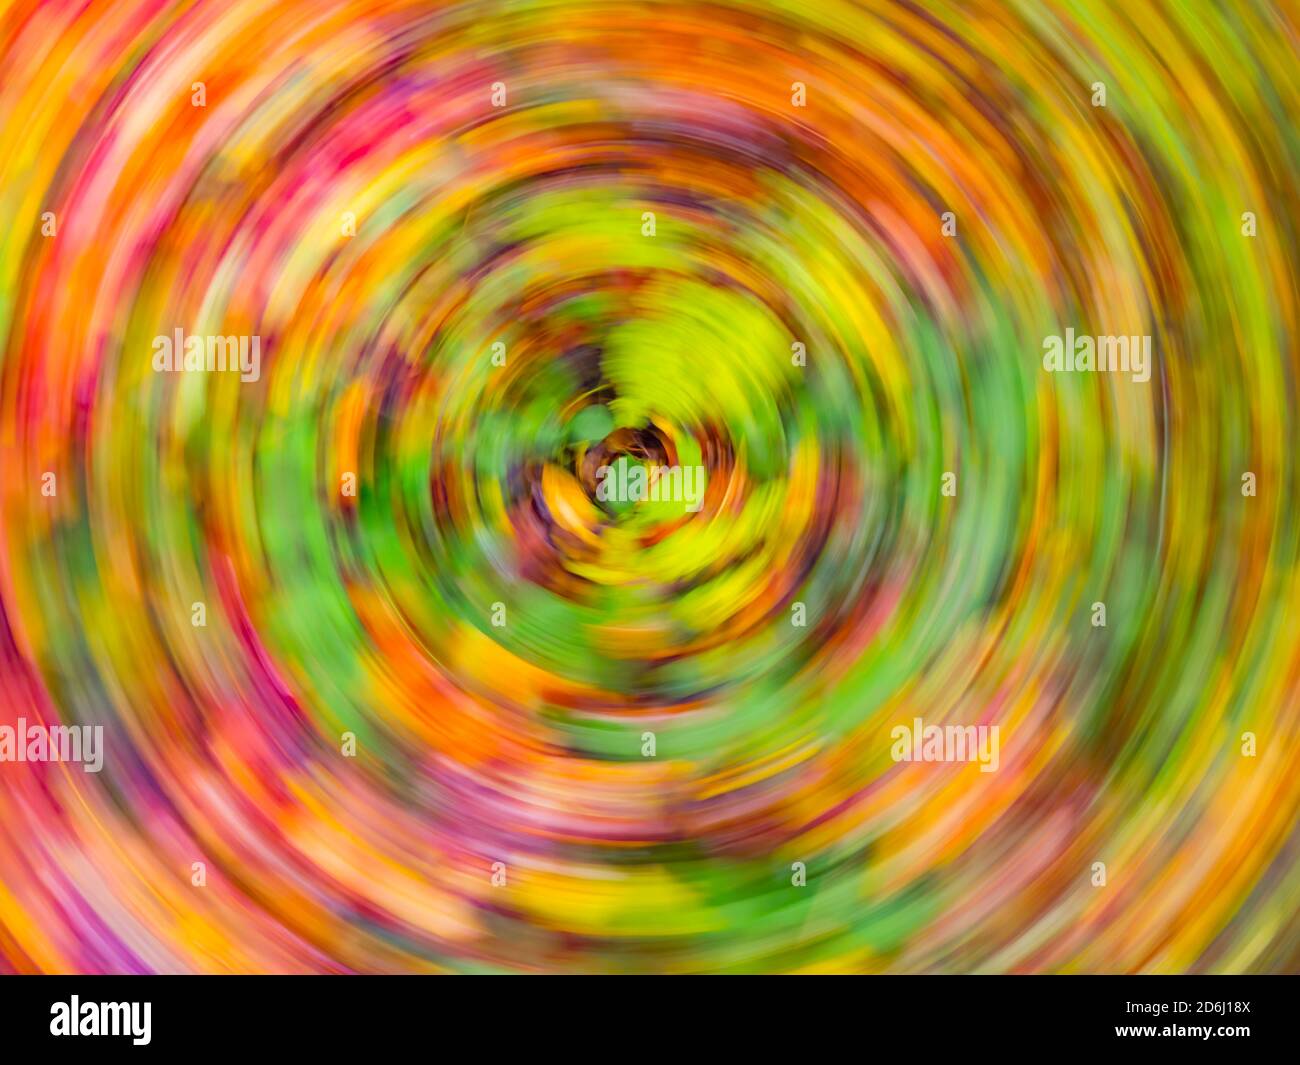 Fallen leaves on ground circular round motion frenzy creative Fall Autumn season in woodland forest in Zeleni vir in Skrad in Croatia Europe Stock Photo